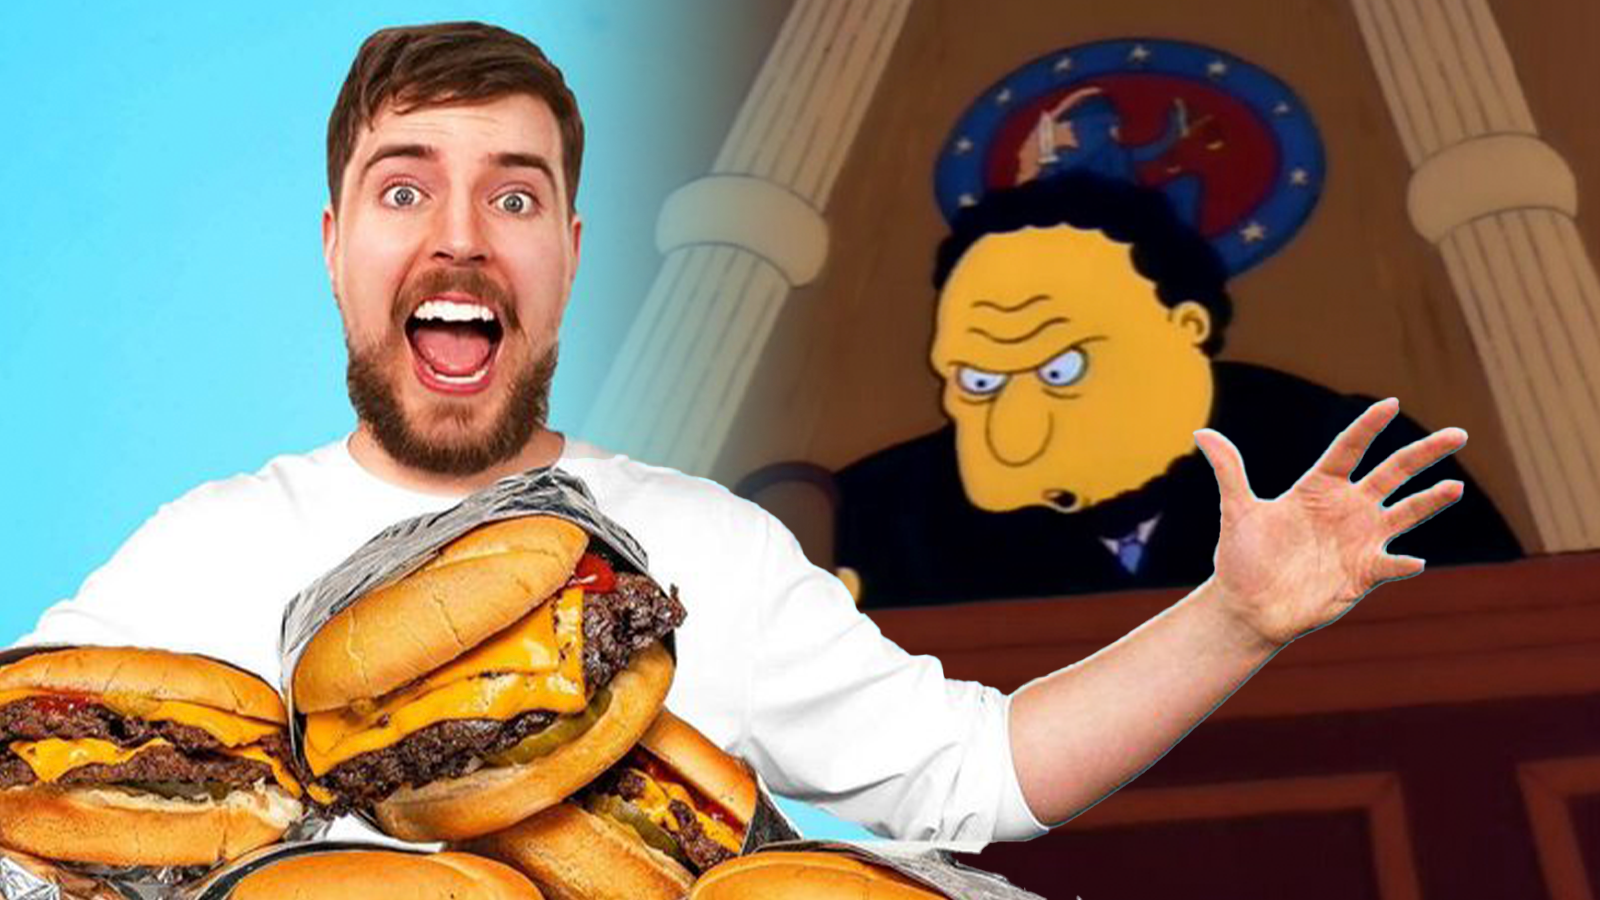 r Mr Beast sued by Mr Beast Burger food delivery service